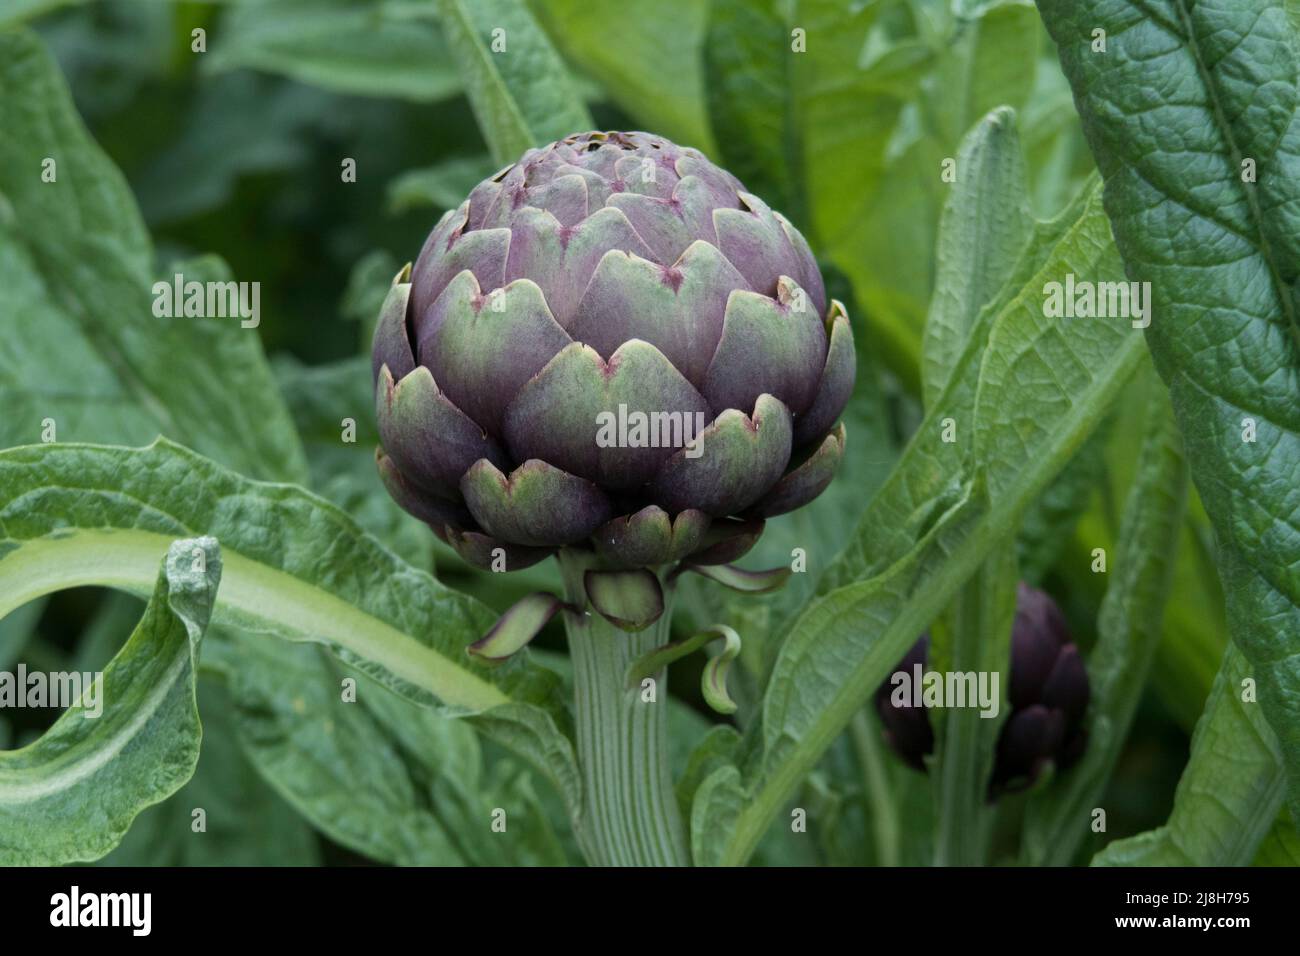 Artichokes growing in old country garden Stock Photo